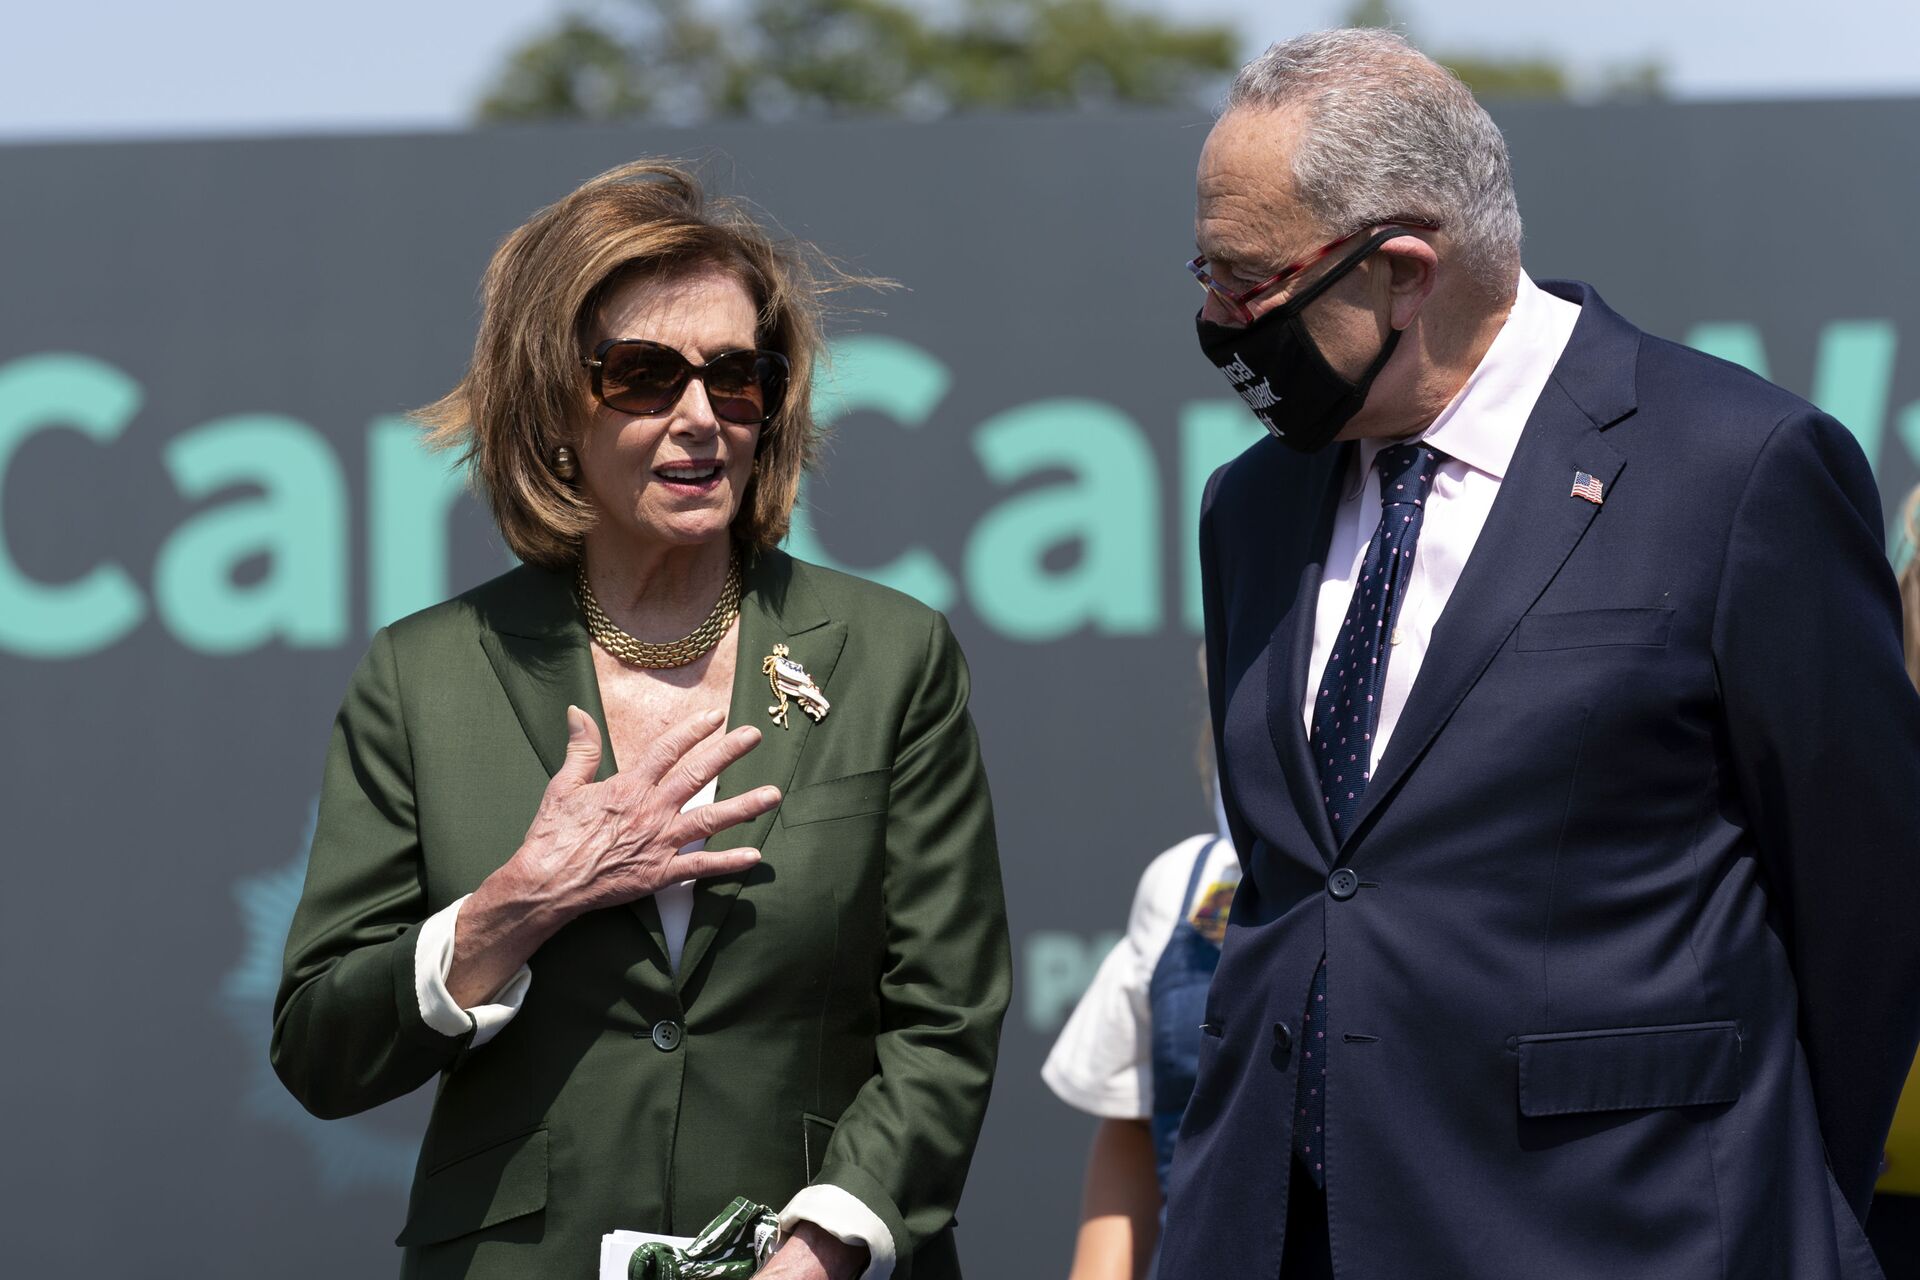 Speaker of the House Nancy Pelosi, D-Calif., speaks with Senate Majority Leader Chuck Schumer, D-N.Y., during Paid Leave for All rally on Capitol Hill in Washington, Wednesday, Aug. 4, 2021. - Sputnik International, 1920, 29.09.2021